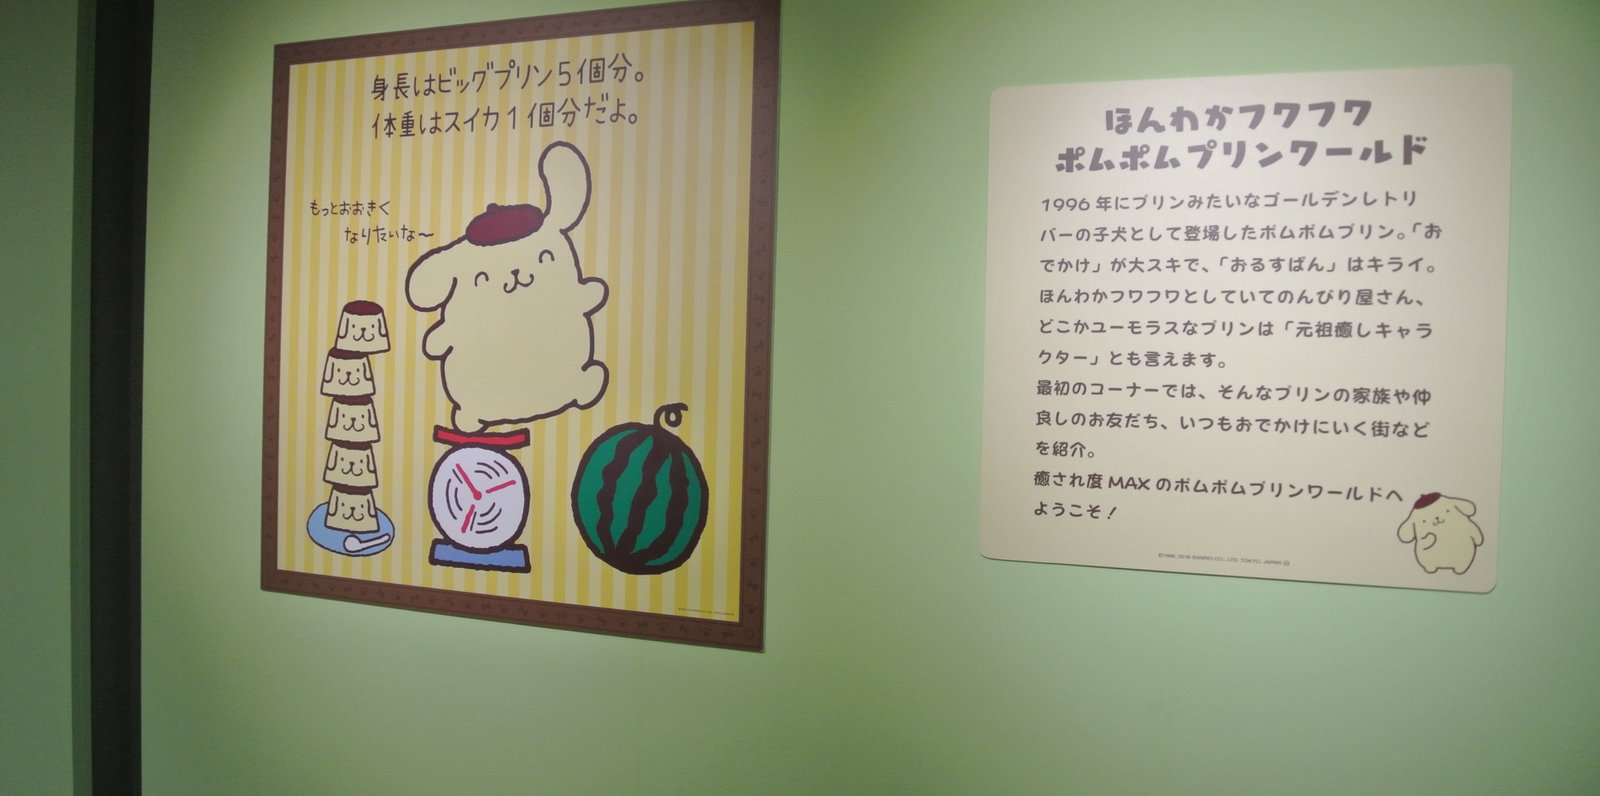 Pompompur Exhibition Orange Plan For Sanrio Kimono In Kyoto Let S Be Healed By A Cute World Playlife Play Life